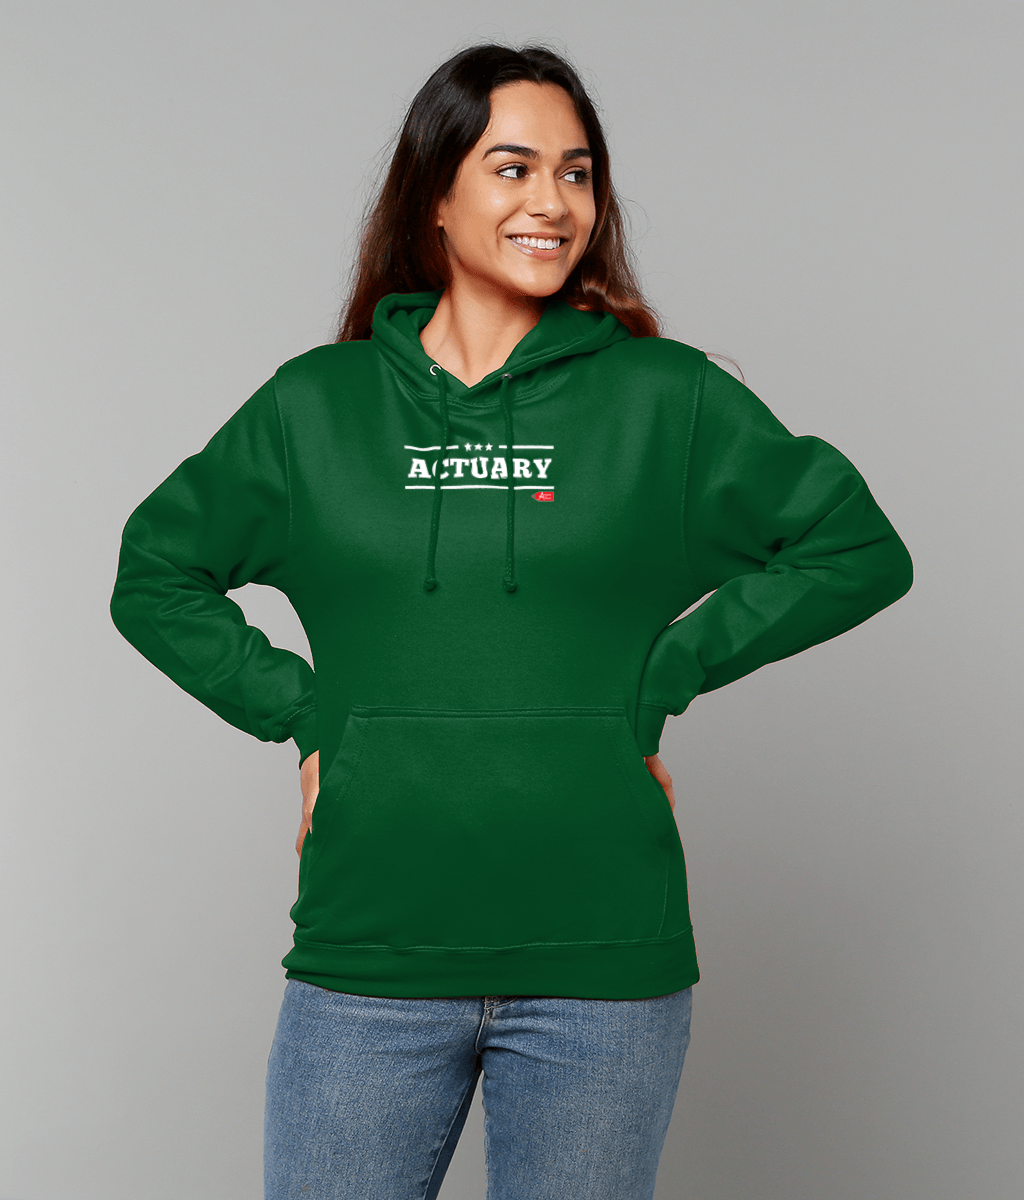 Actuary Bold Star Military College Hoodie (Black, Red, Blue, Green Variants)